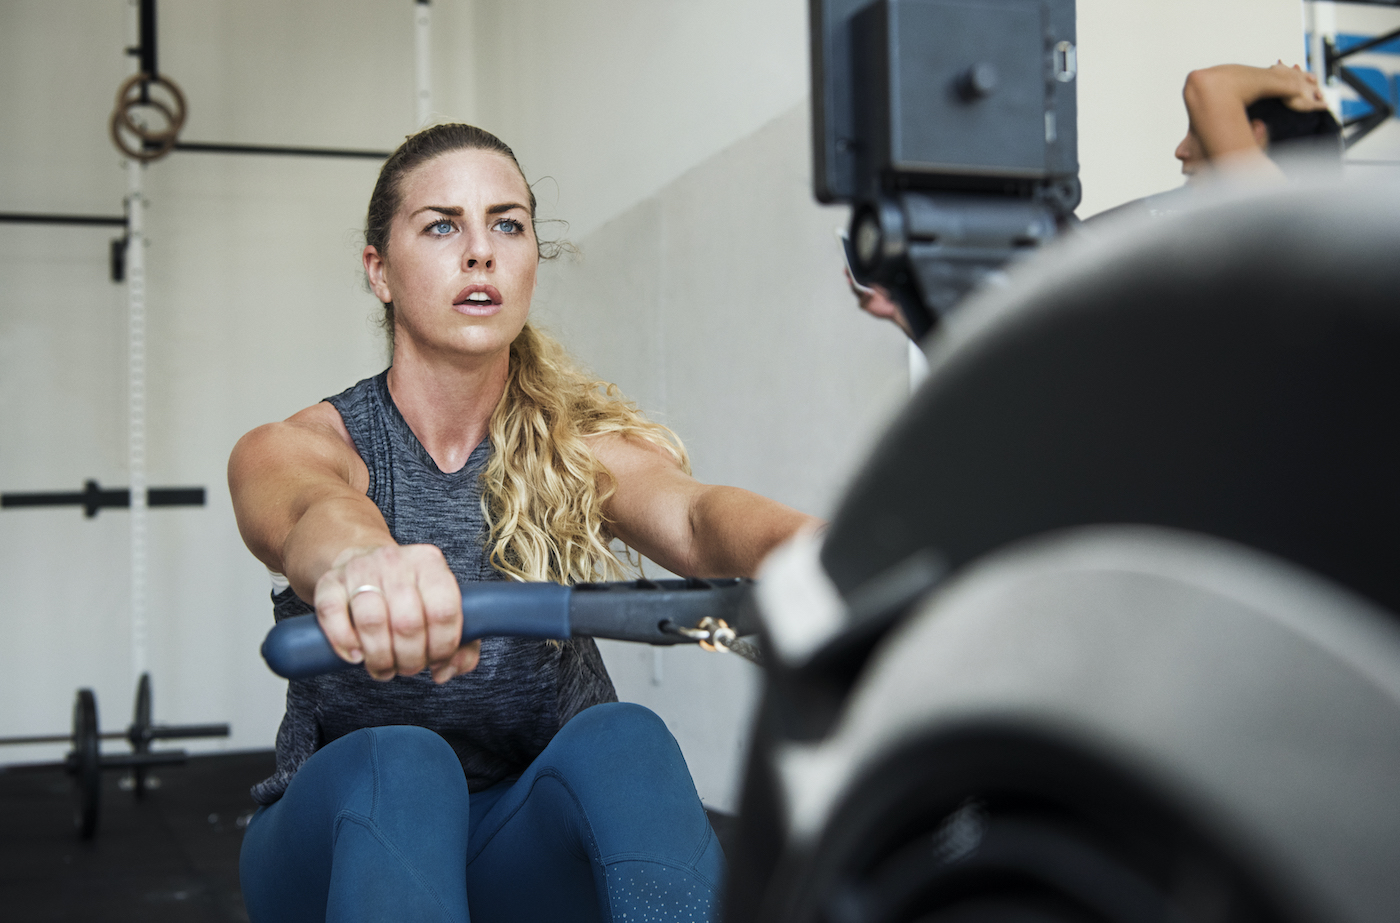 Rowing vs. Running: Which Is the Better Workout? | Well+Good